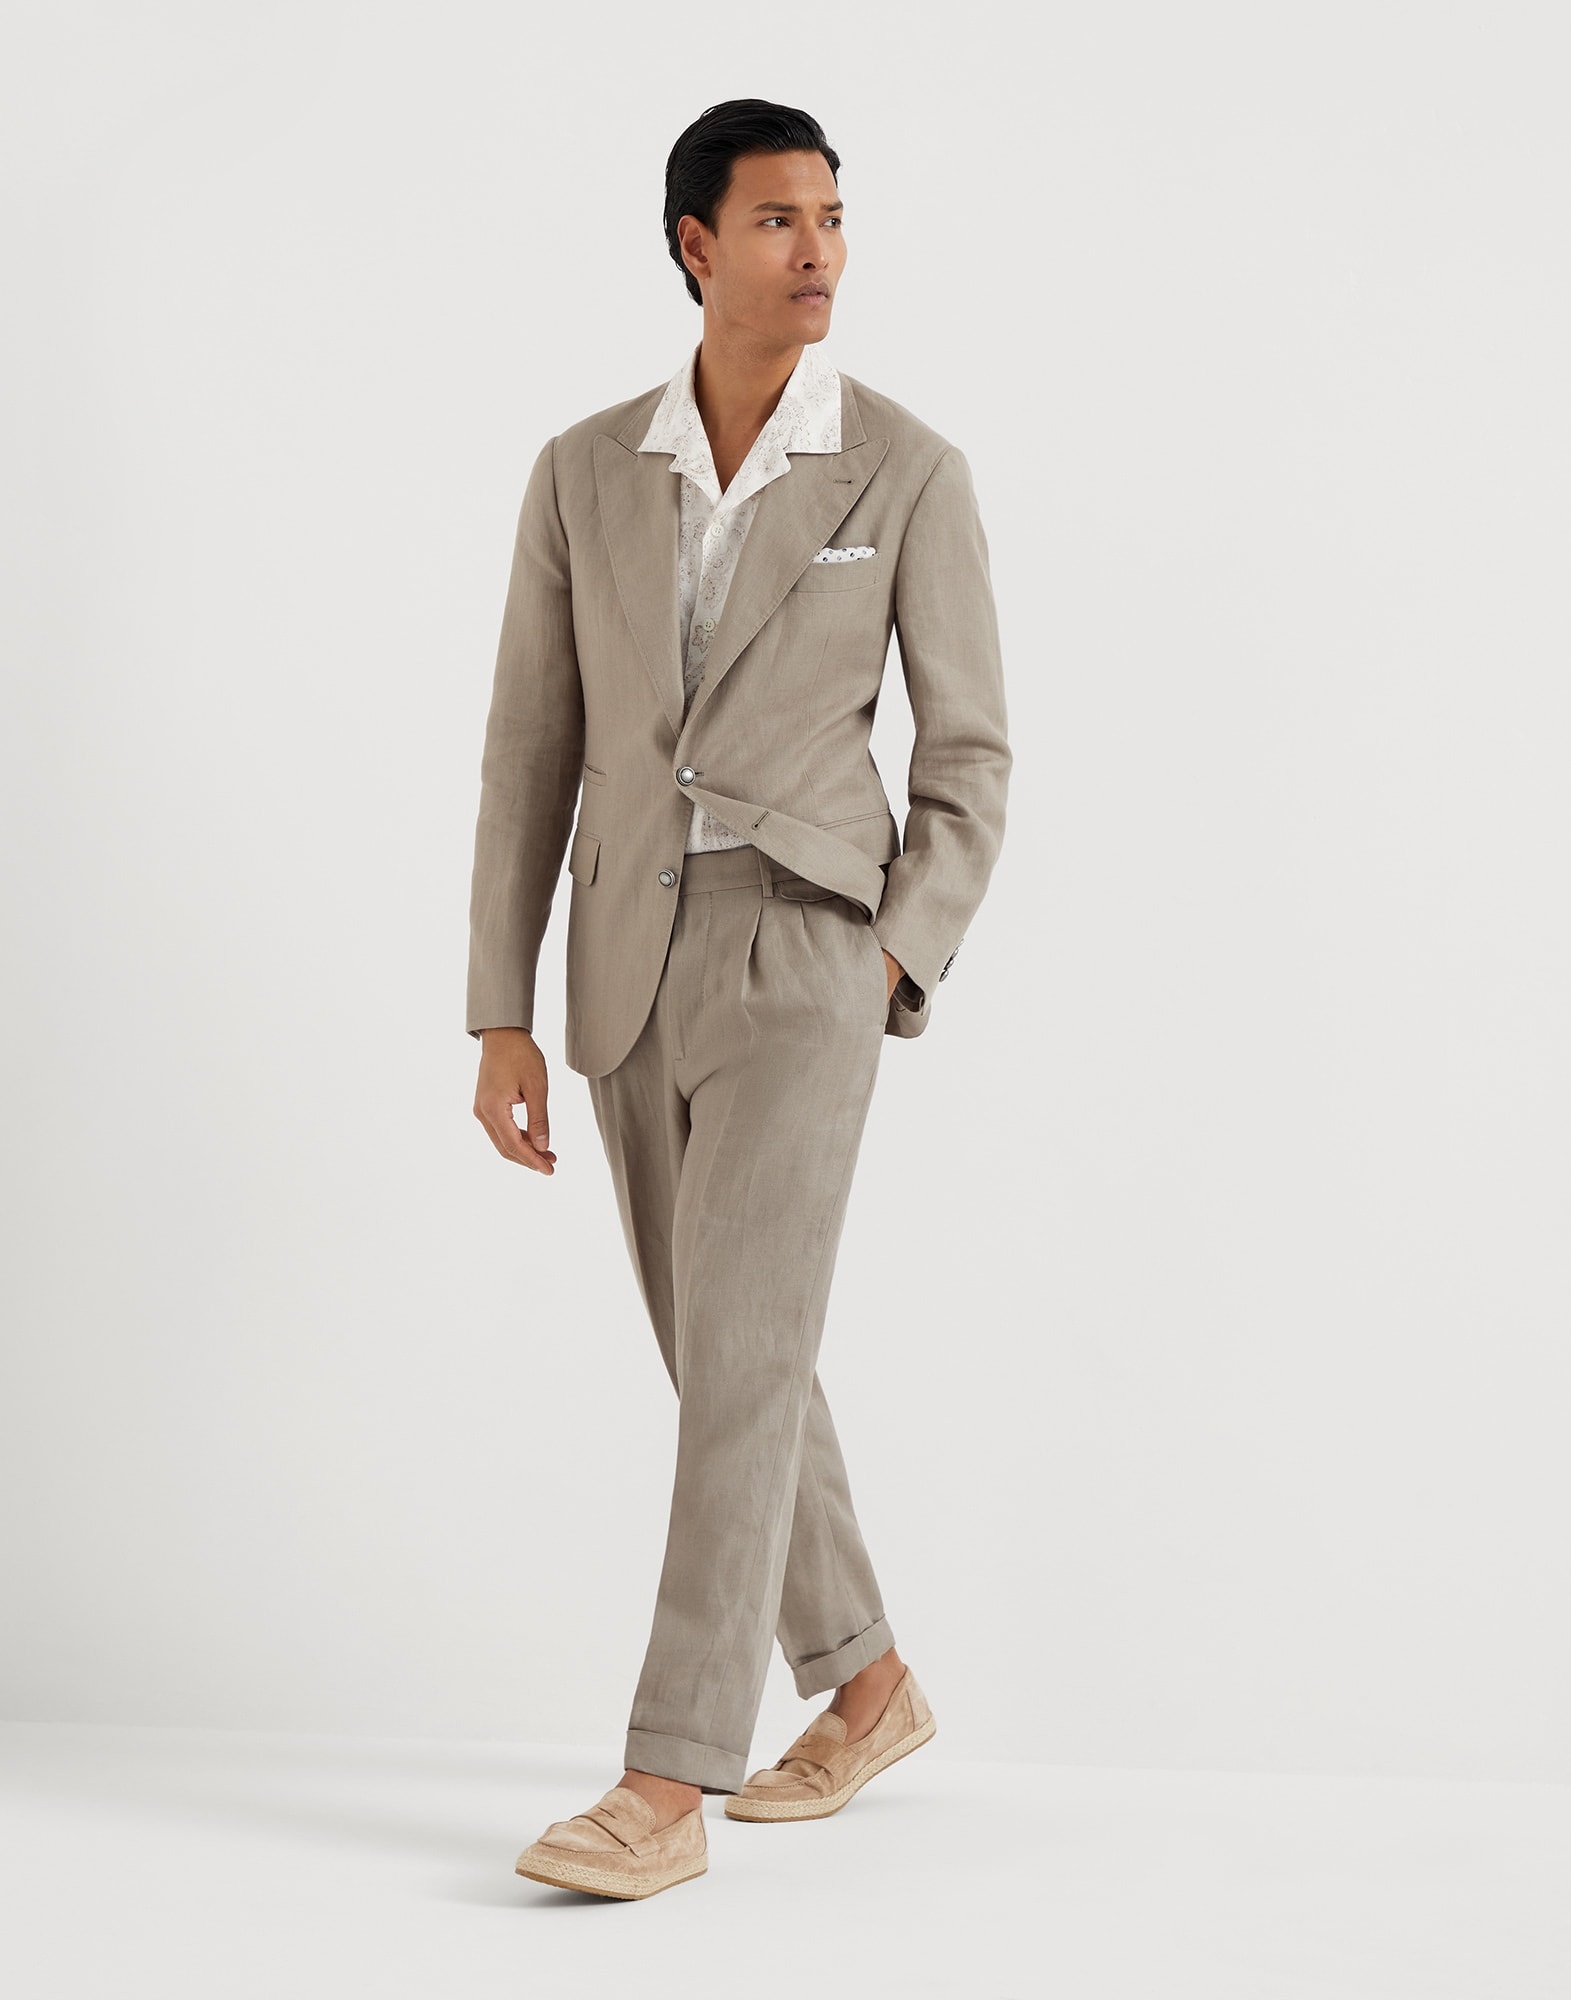 Linen micro chevron Leisure suit: peak lapel jacket with metal buttons and double-pleated trousers - 1